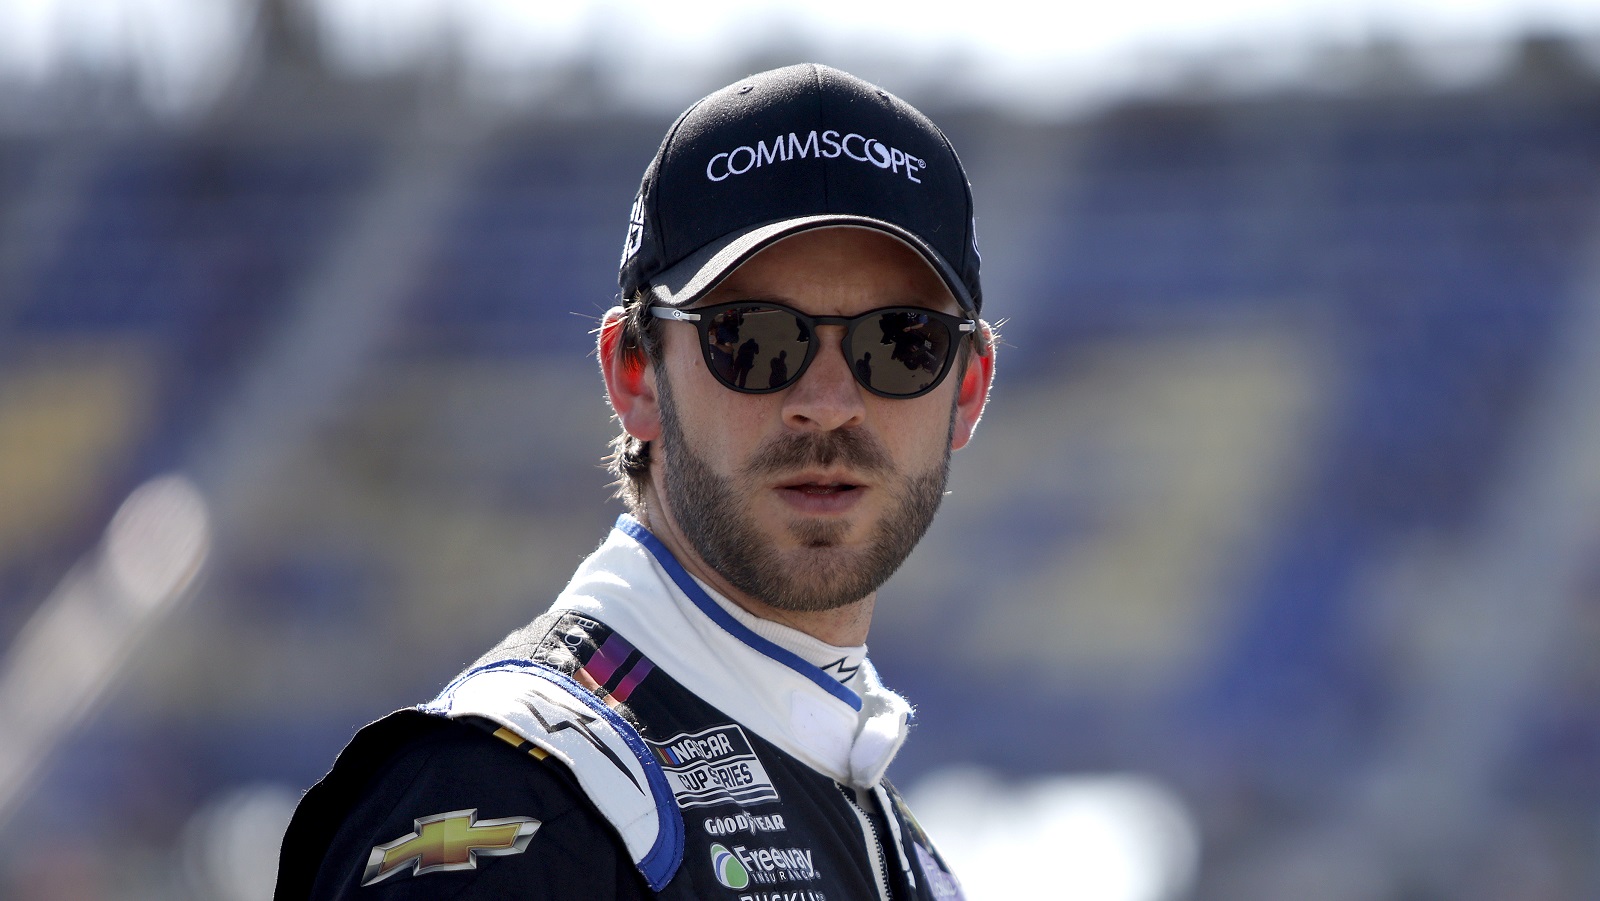 Daniel Suarez looks on during practice for the NASCAR Cup Series AdventHealth 400 at Kansas Speedway on May 14, 2022 in Kansas City, Kansas.